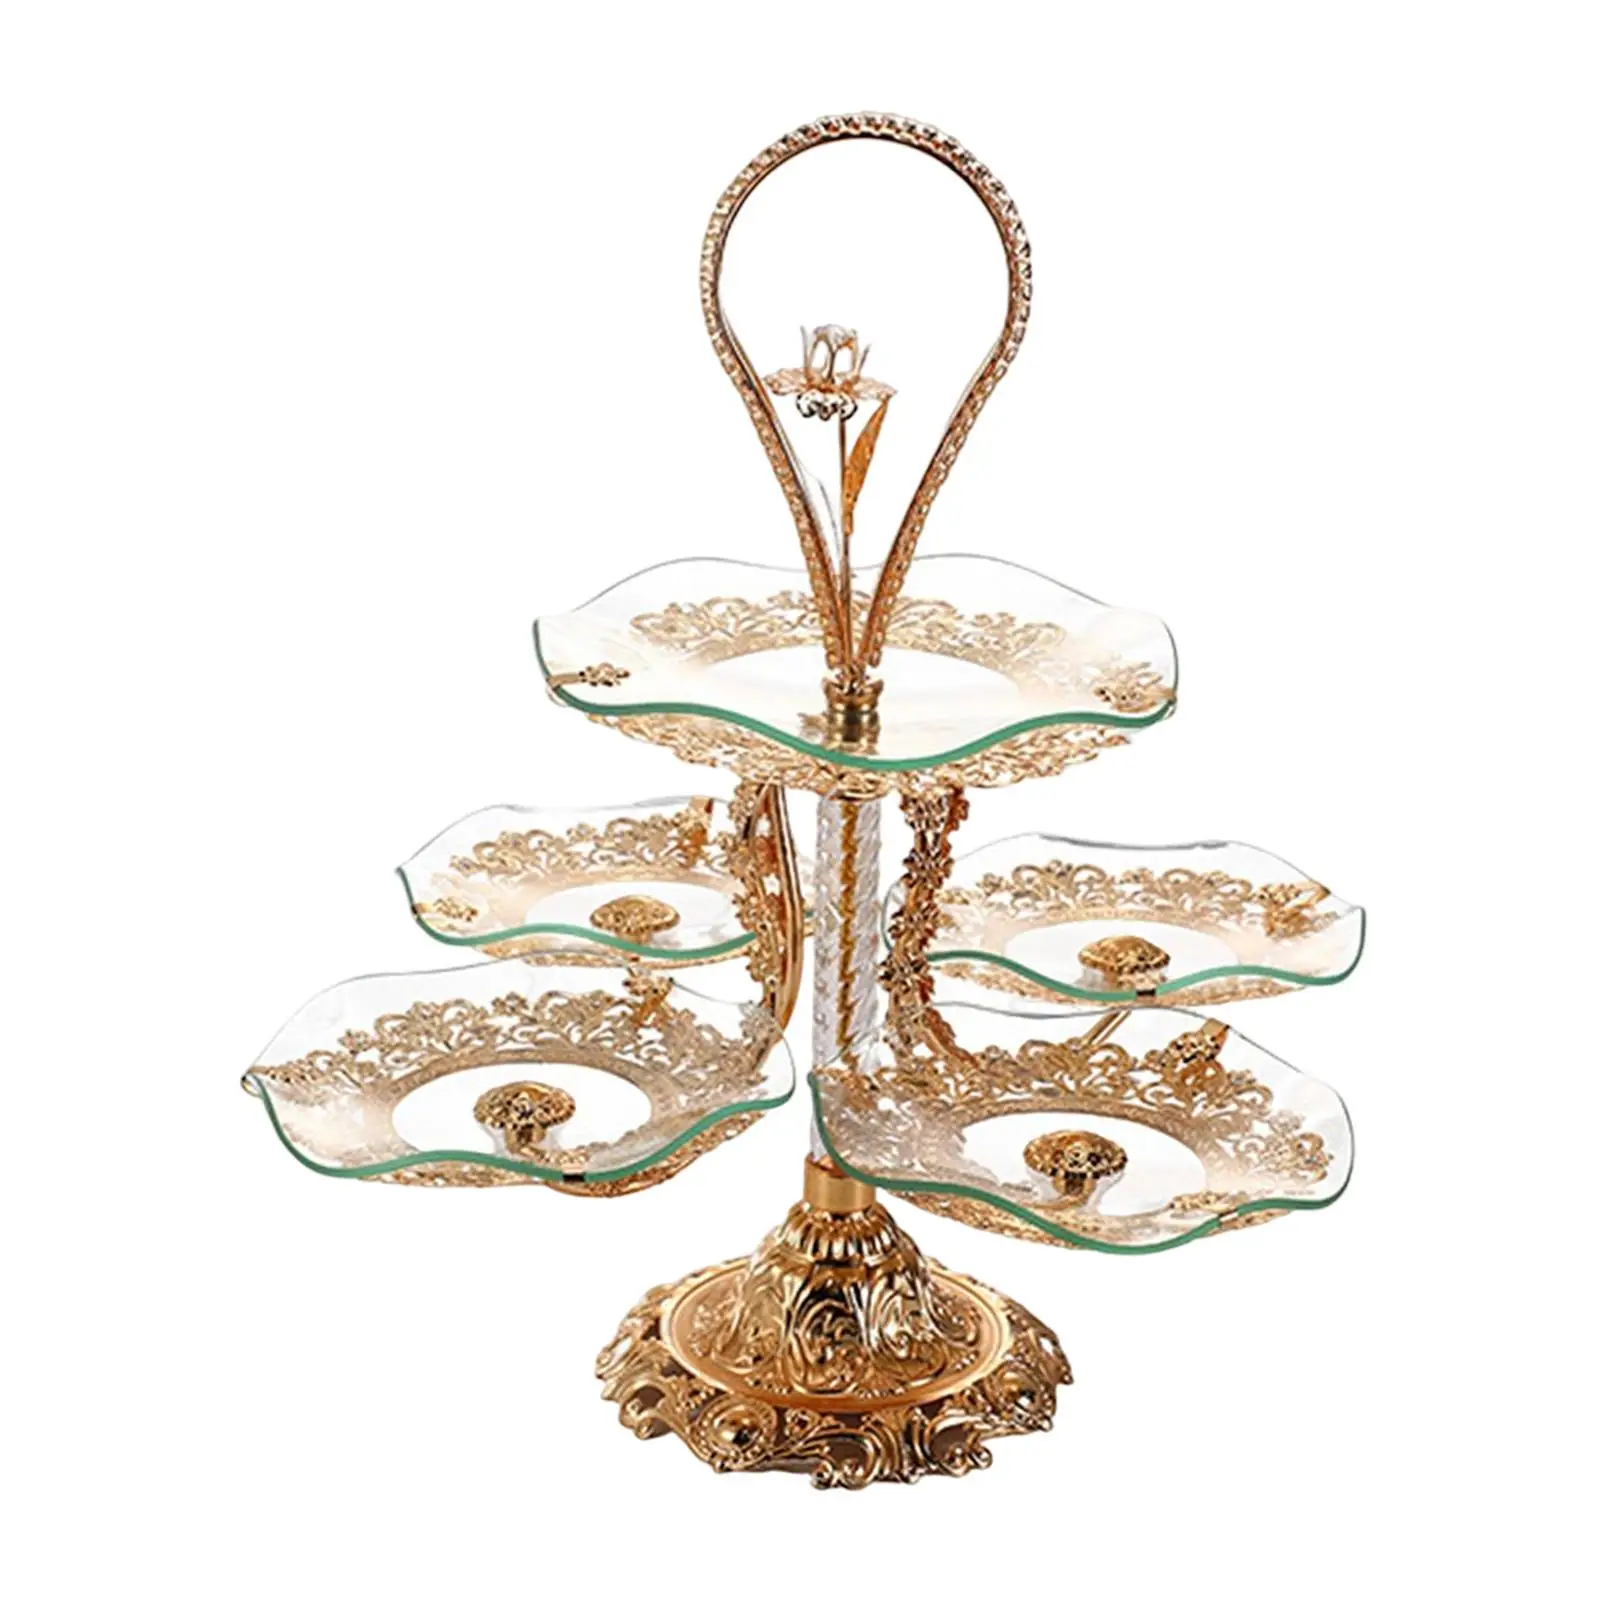 Multi Tier Serving Stand Tree Stand Exquisite Candy Dishware Storage Serving Tray for Kitchen